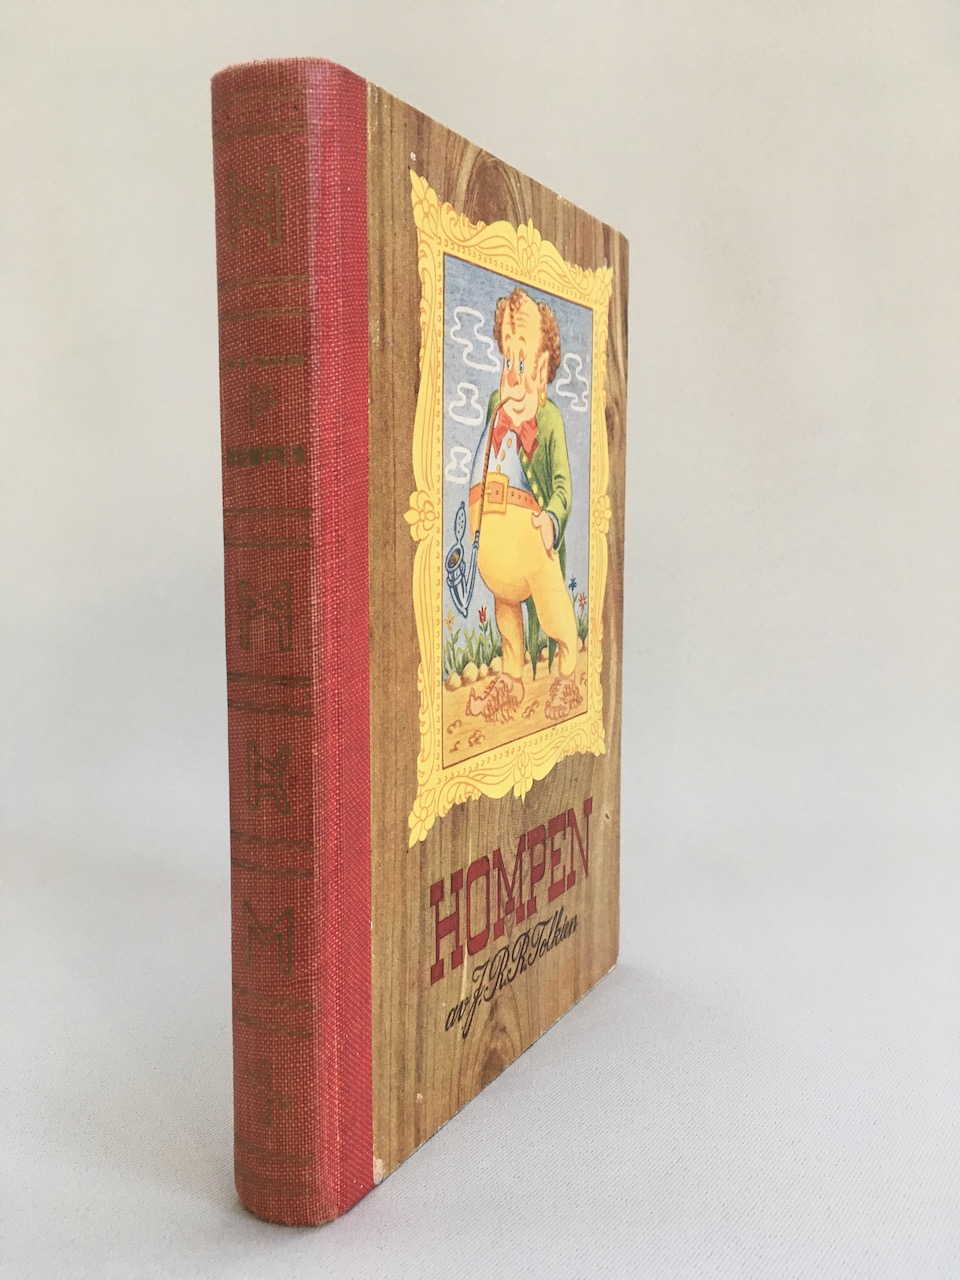 Hompen, 1947, first Swedish edition - first translation of The Hobbit into any language 2